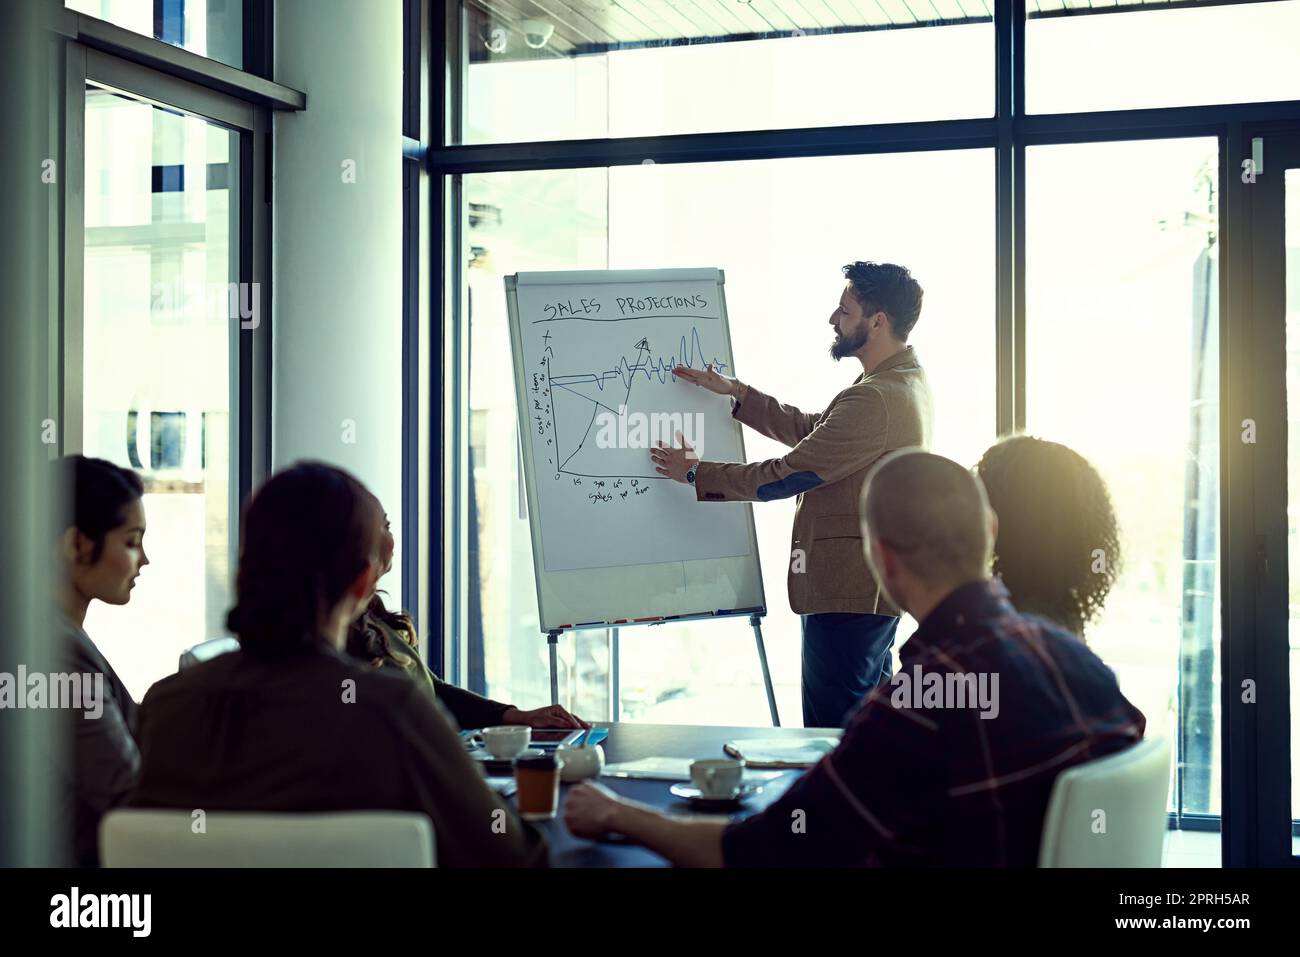 In this office, impossible is nothing. a businessman giving a presentation in the boardroom. Stock Photo